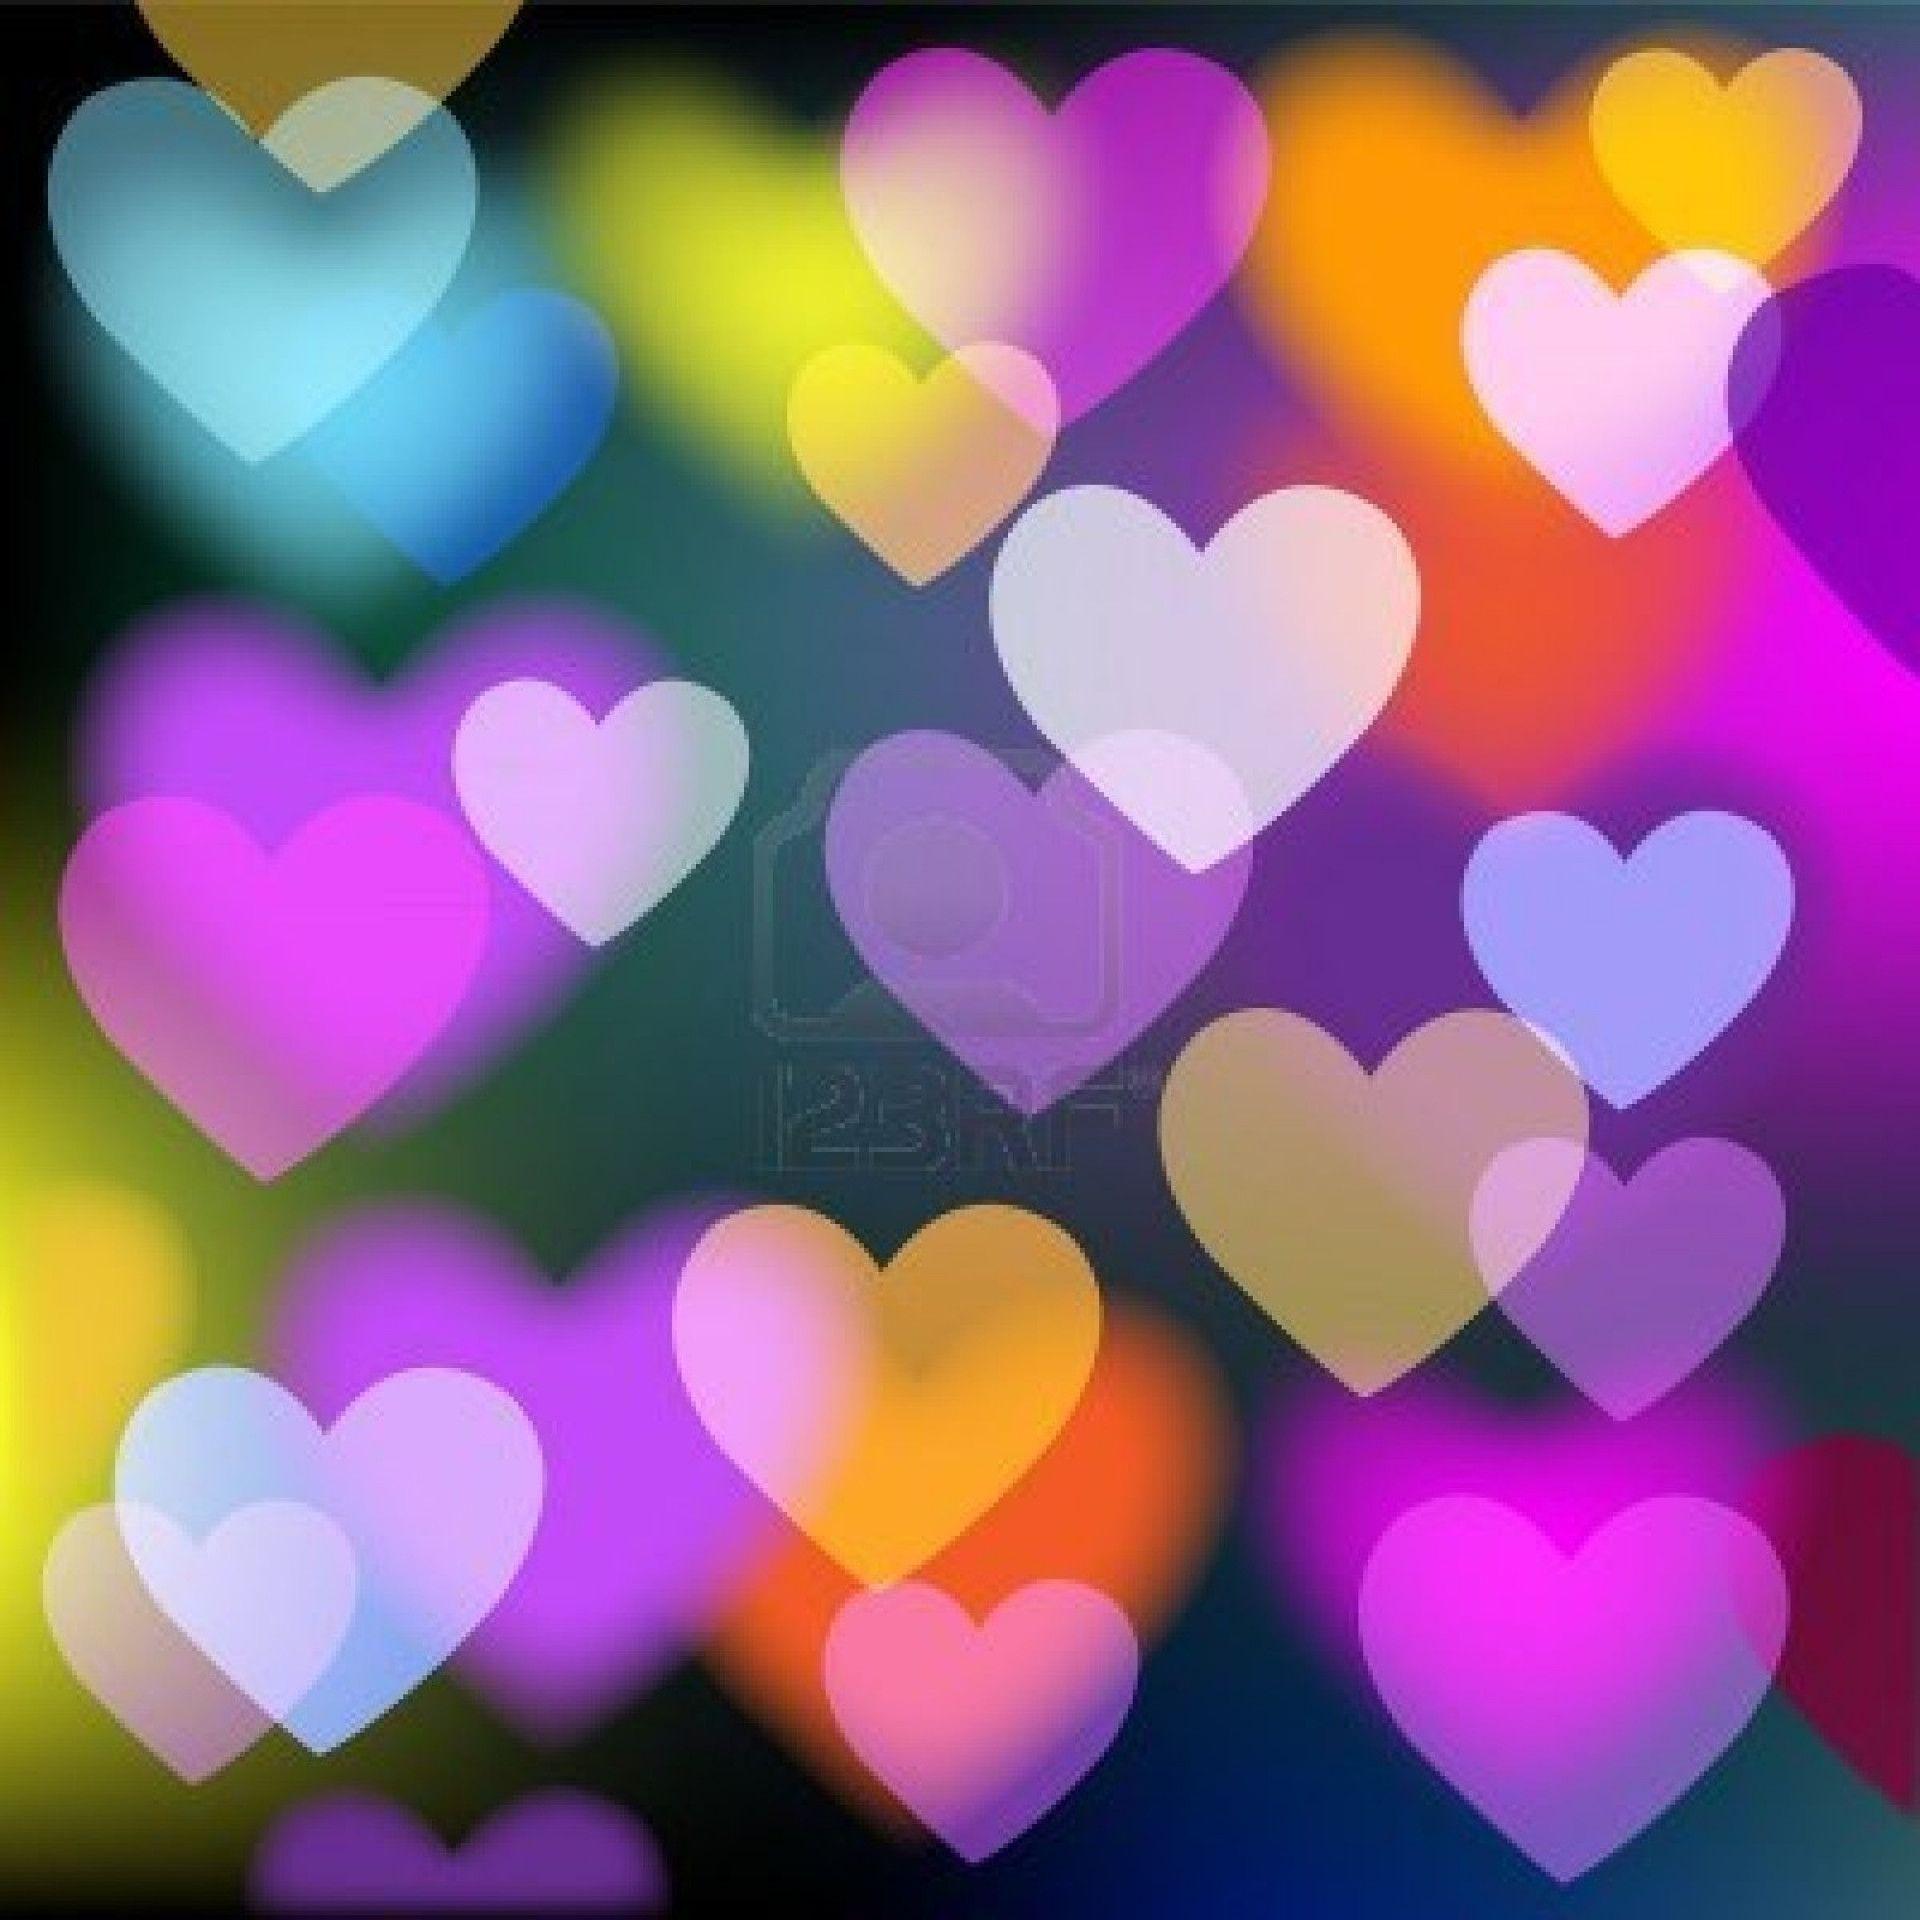 abstract colorful vector background with hearts royalty free